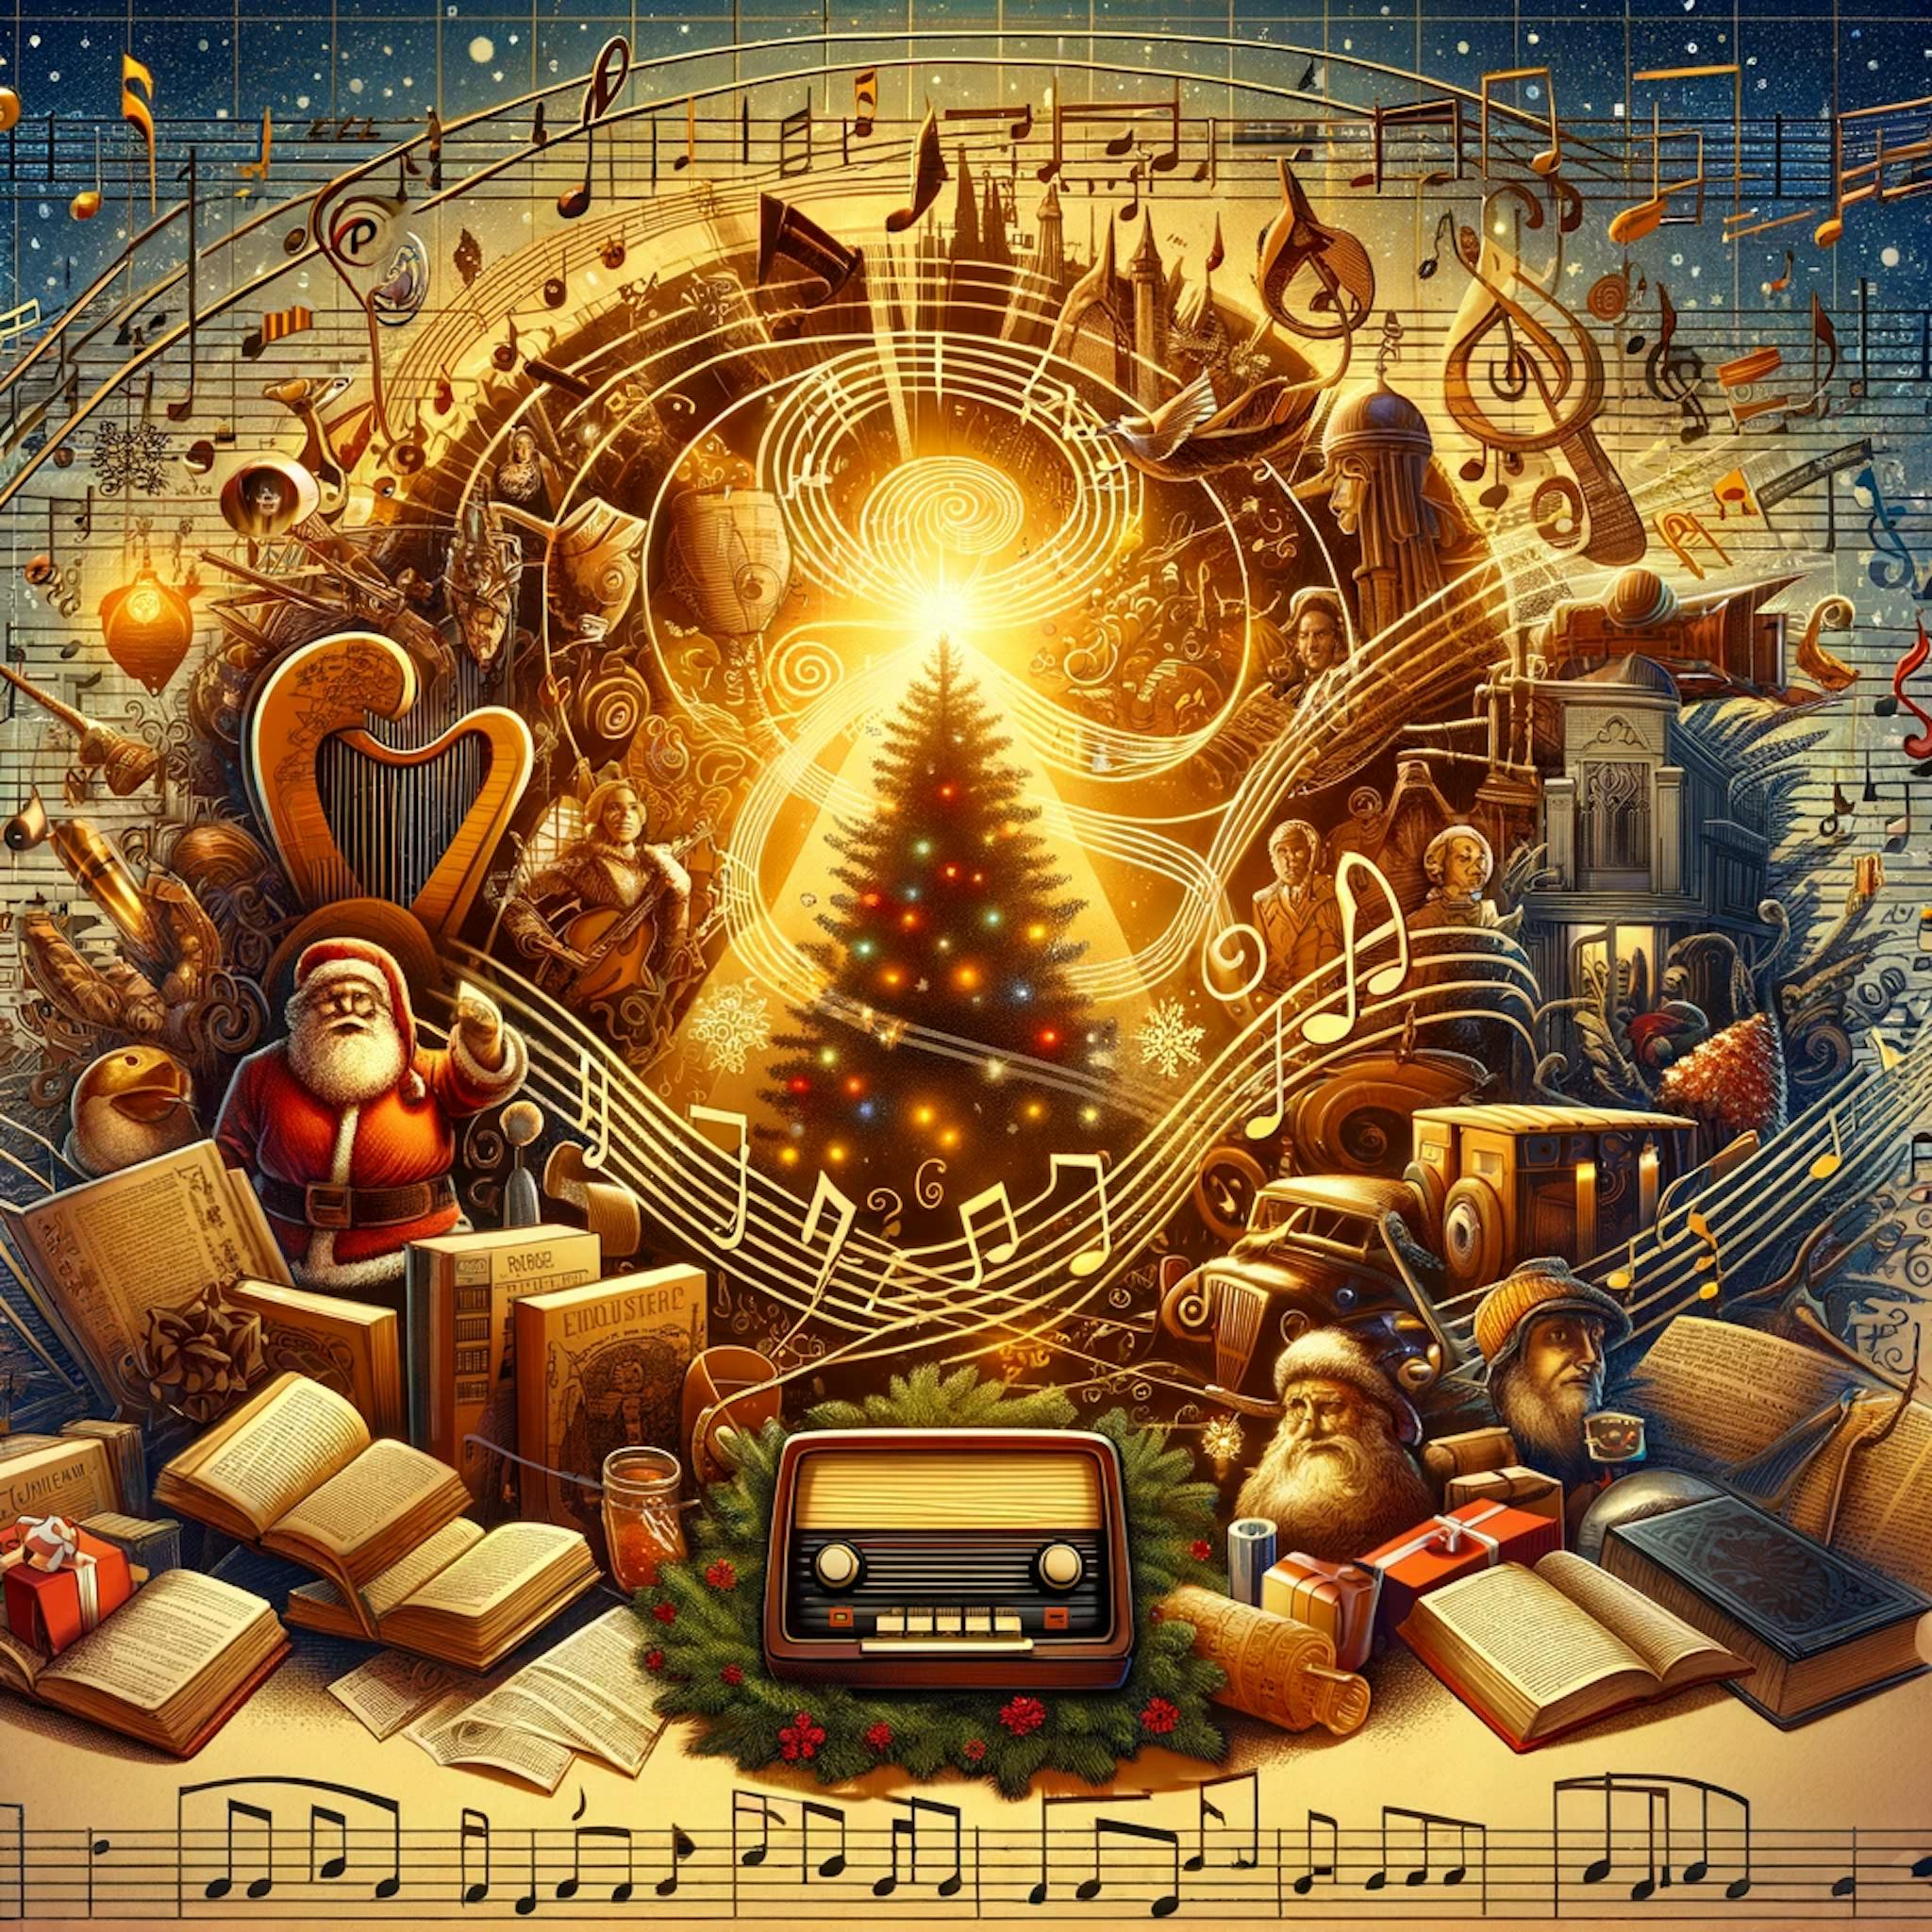 cultural impact of Christmas music and literature